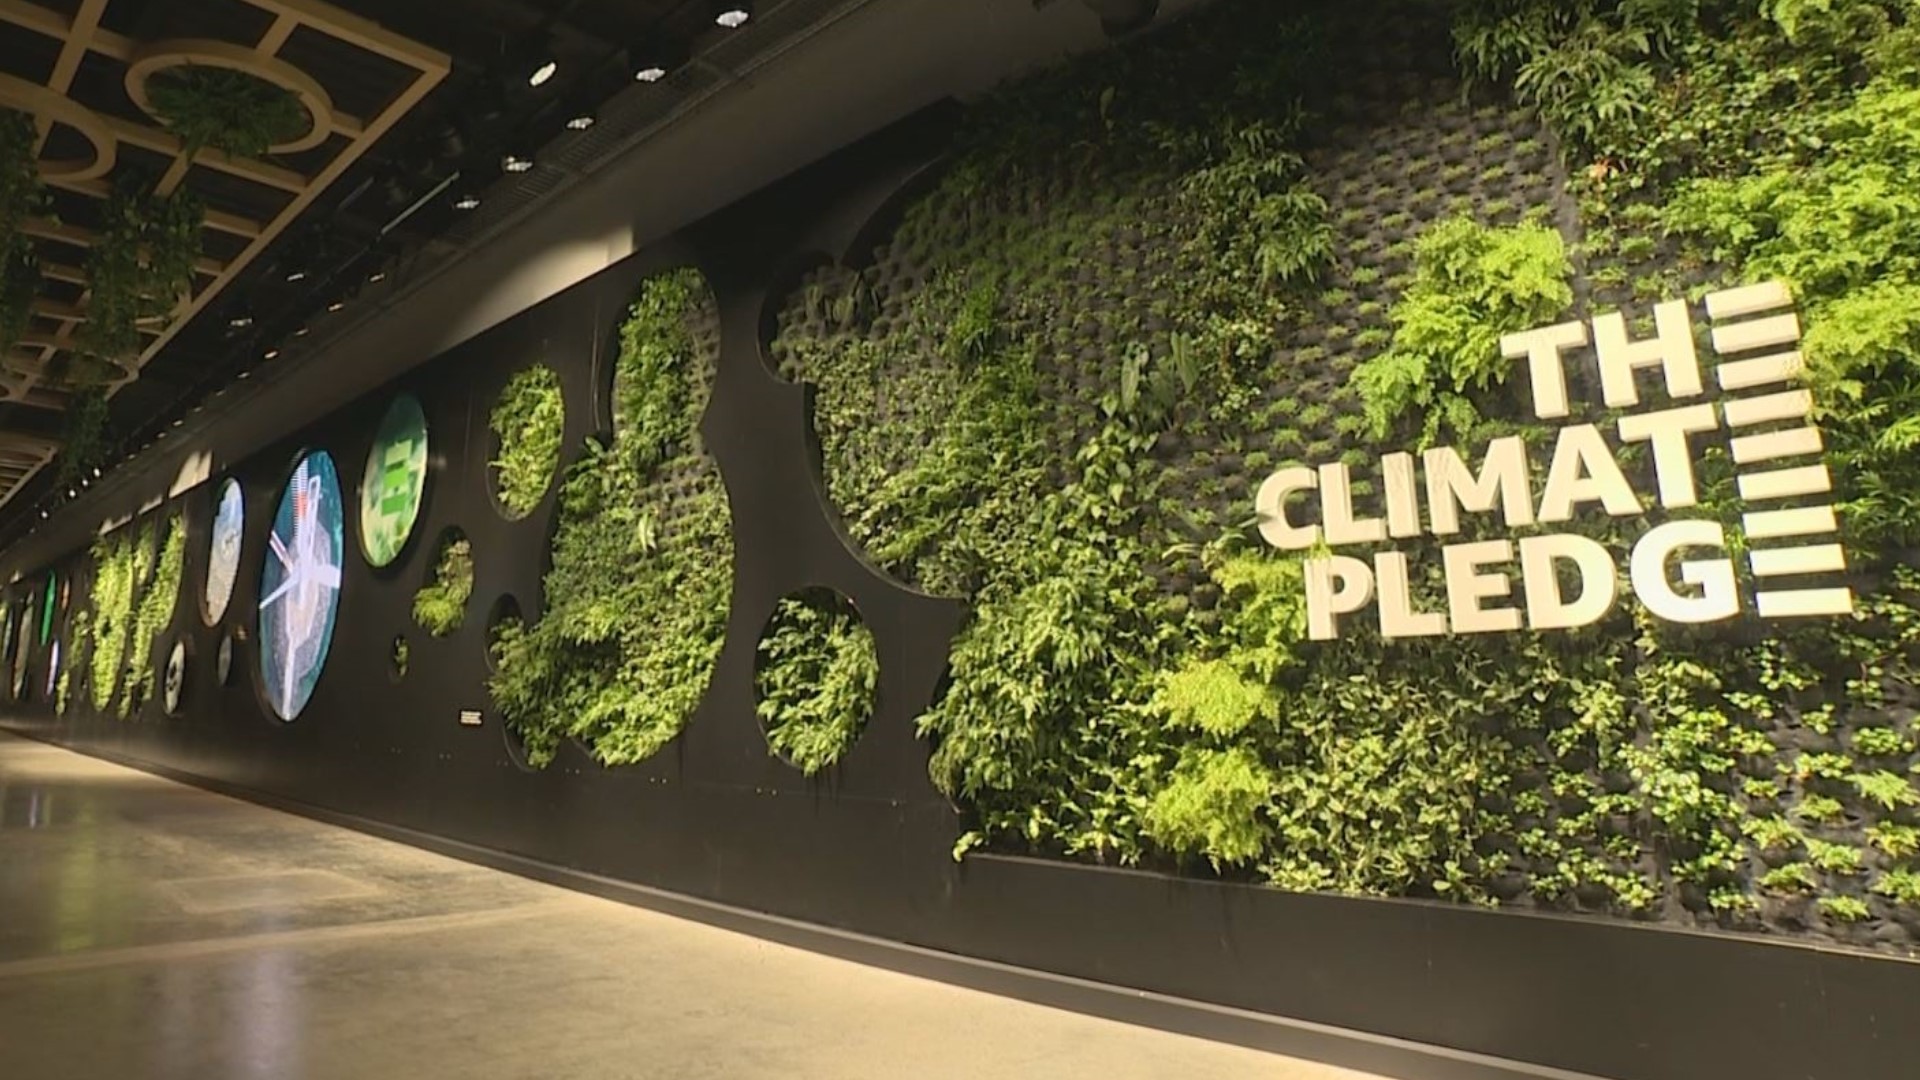 The greenery lines a wall along the arena's main concourse offering a lush backdrop and symbol of its net-zero mission.